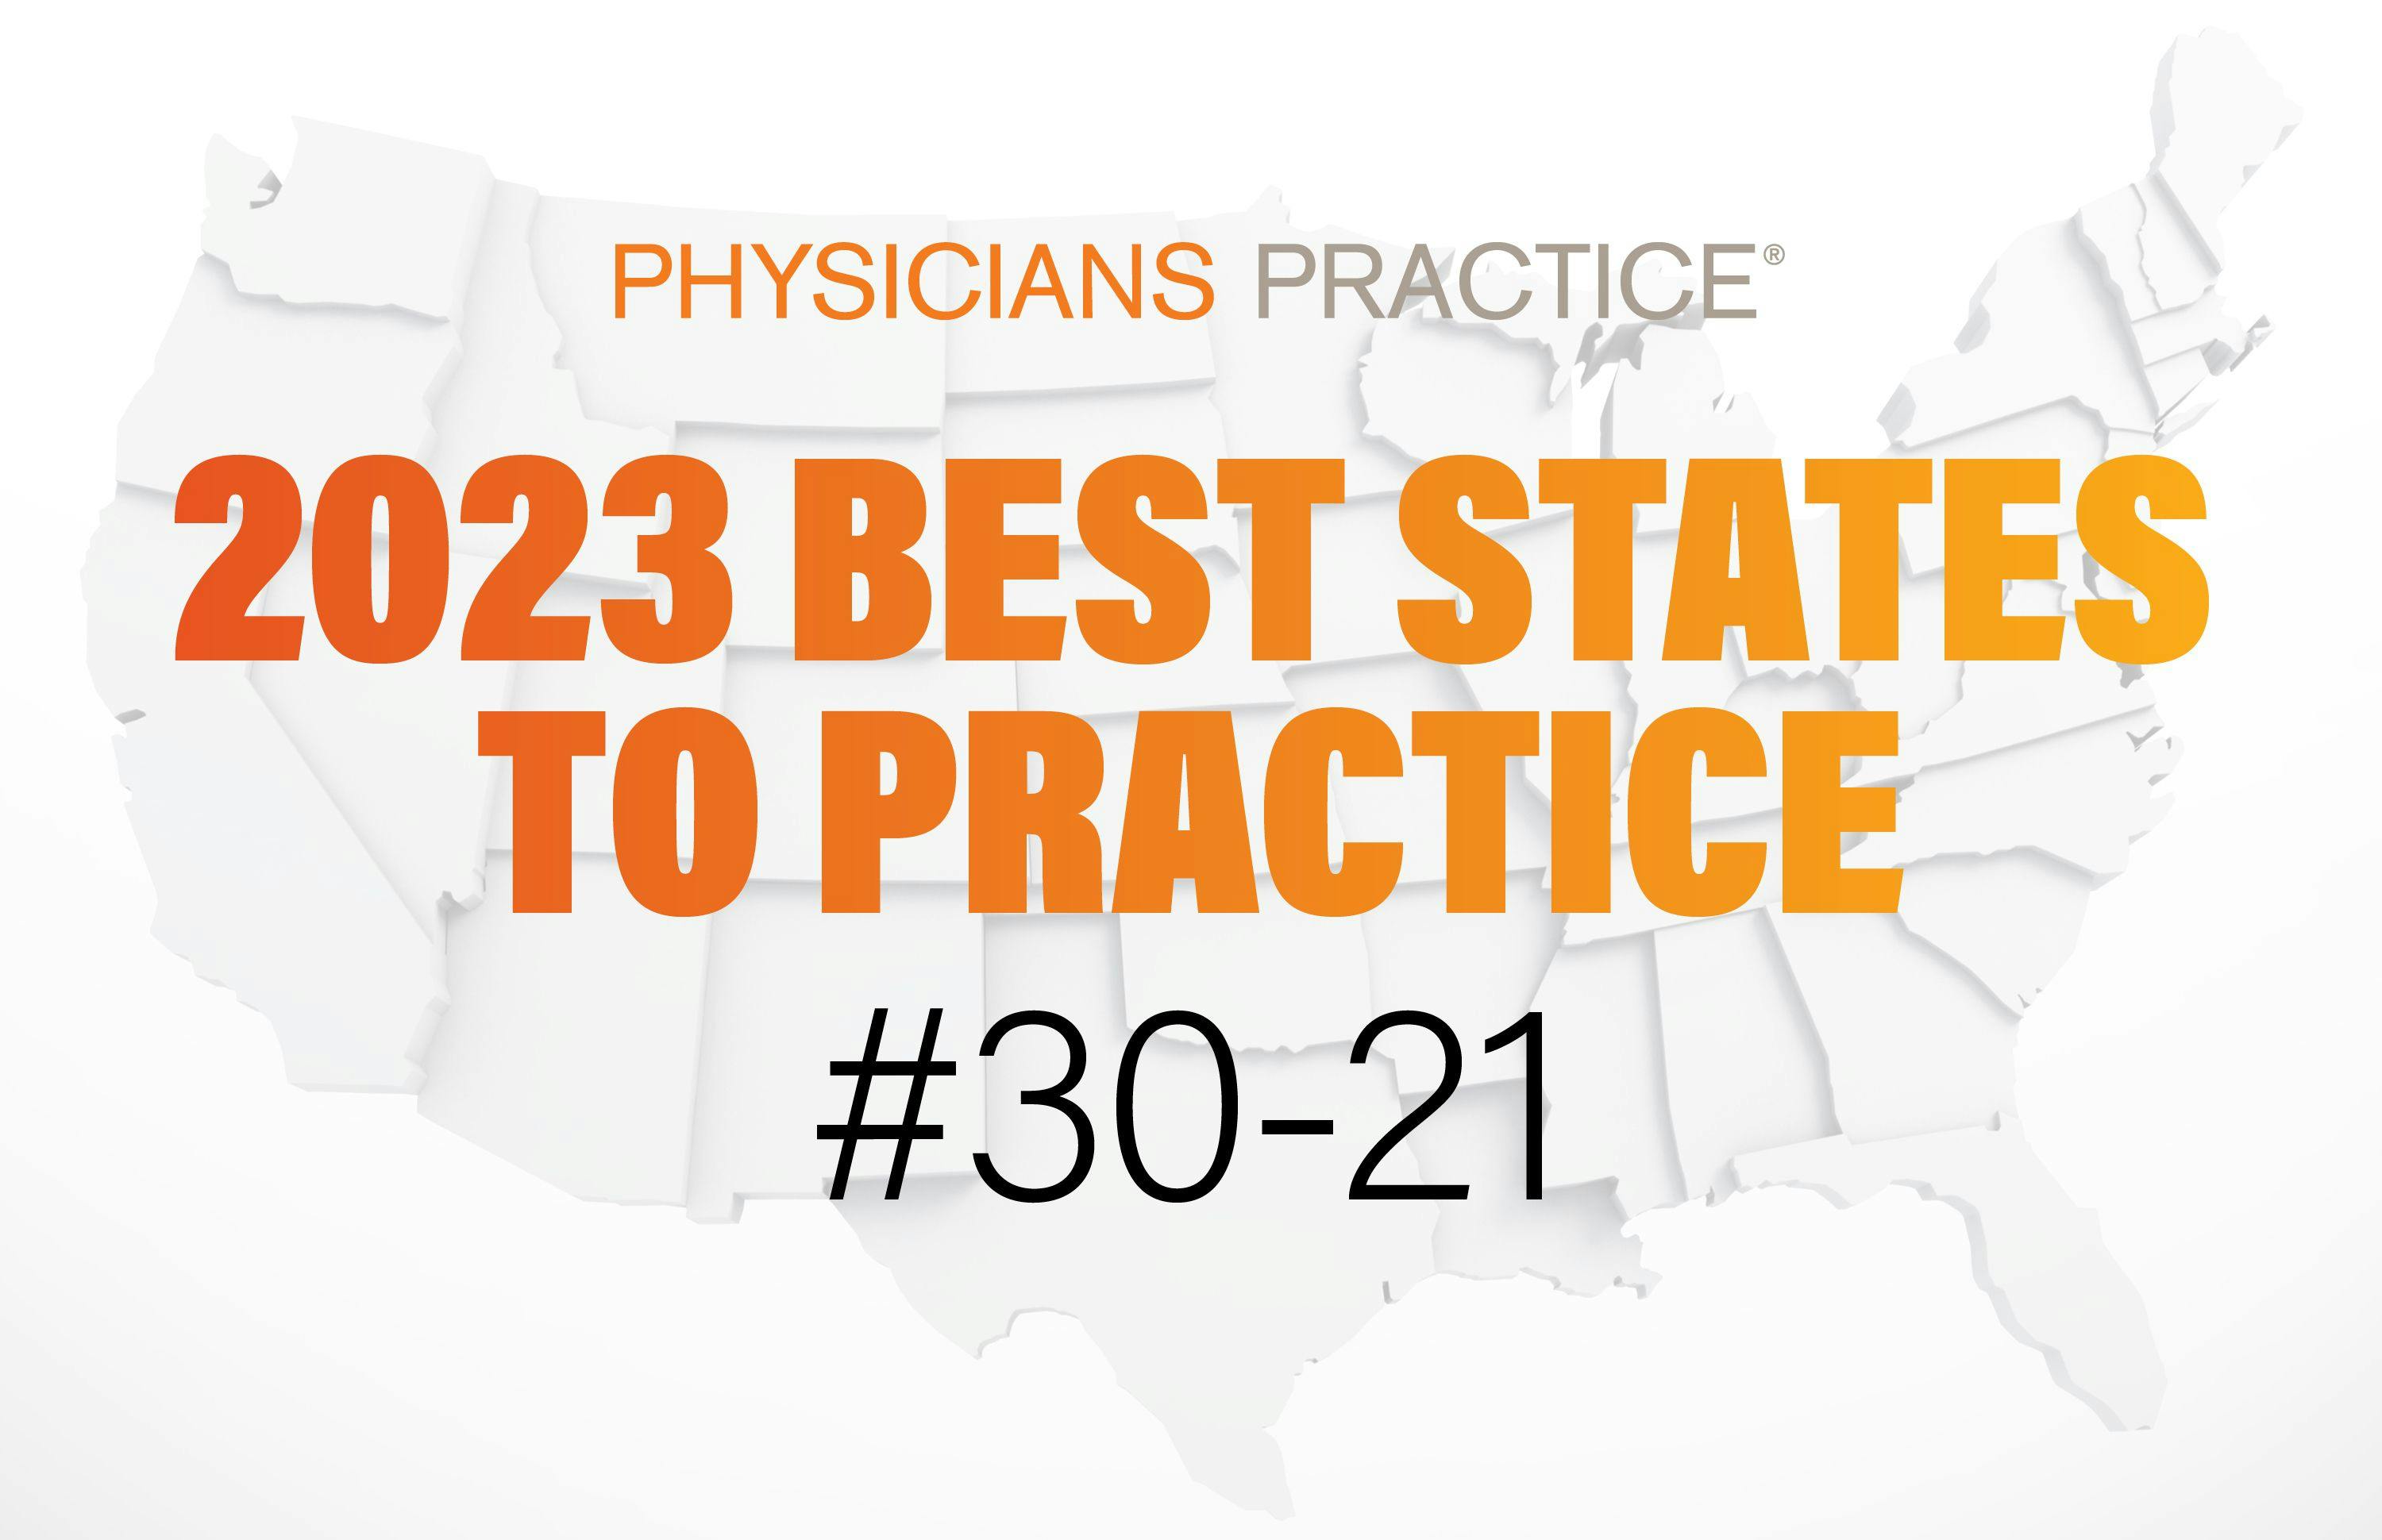 2023 Physicians Practice best states to practice: 30-21